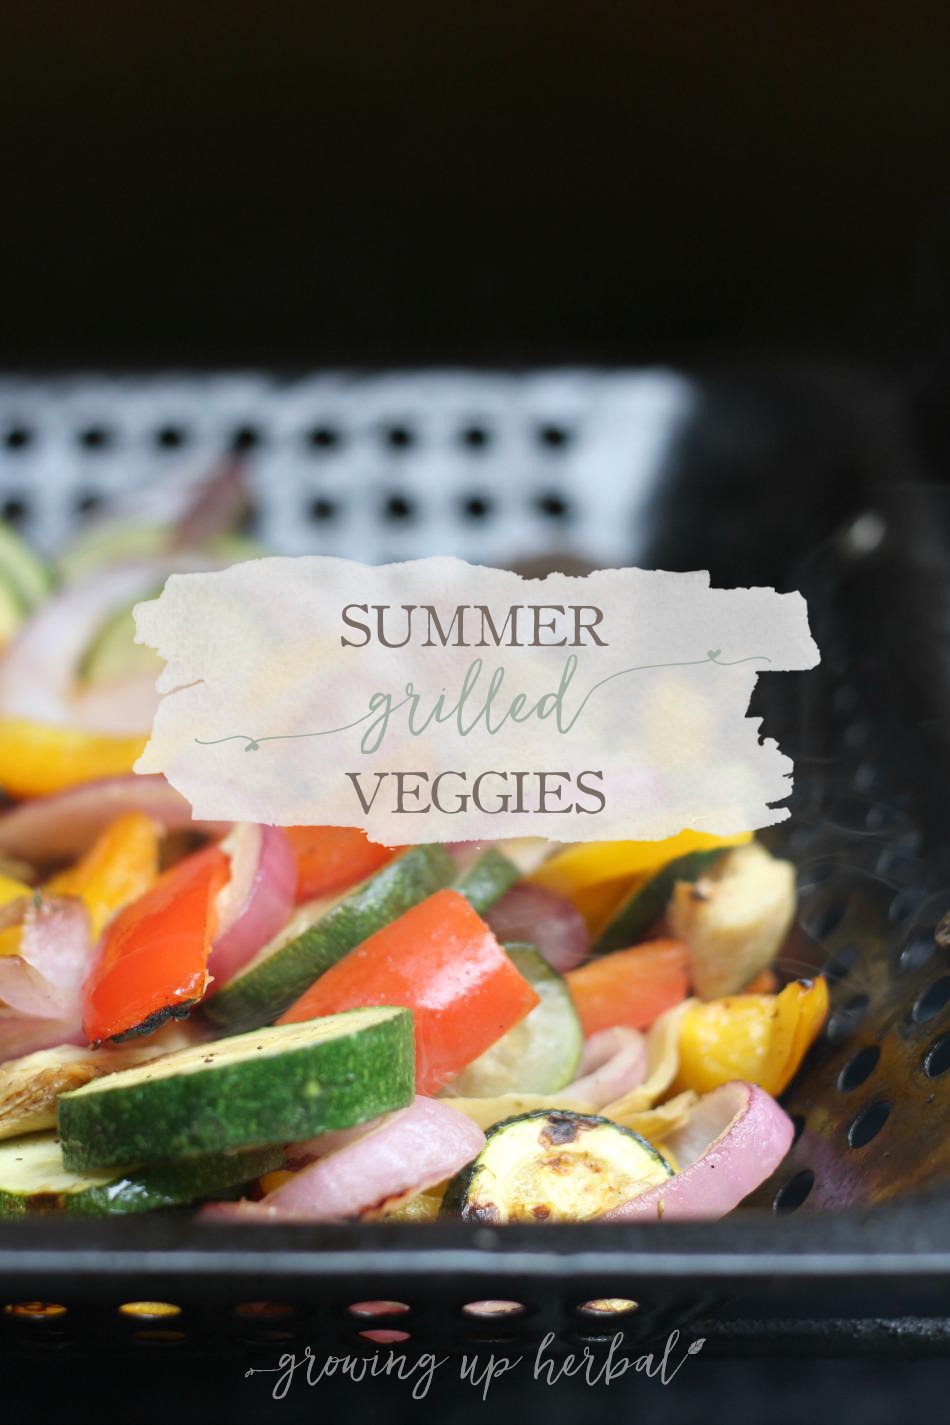 Summer Grilled Veggies (The Easiest Side Dish Ever) | Growing Up Herbal | You'll fall in love with how tasty and easy to make these summer grilled veggies are!